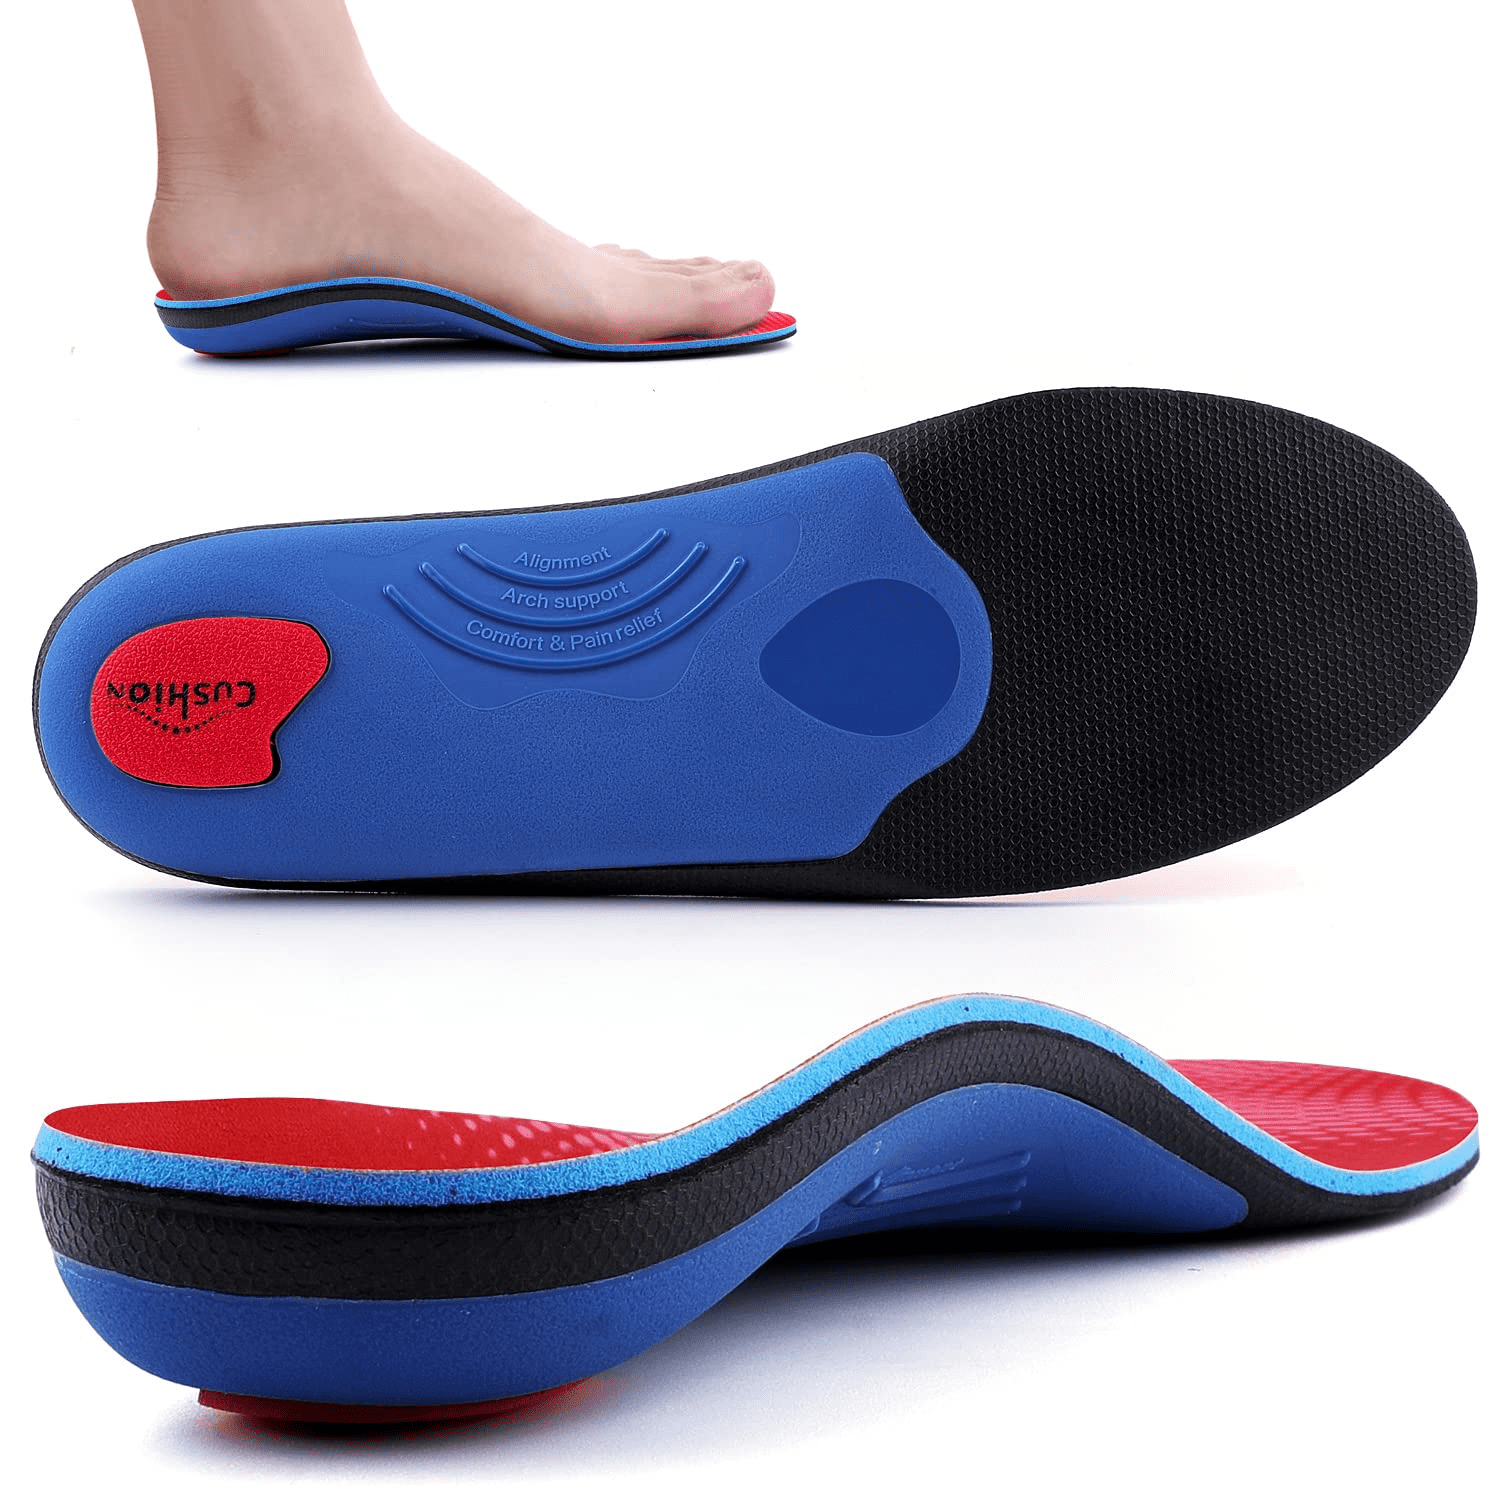 Unisex Orthotic Shoes Functional Insoles Insert High Arch Support Pad New~ 